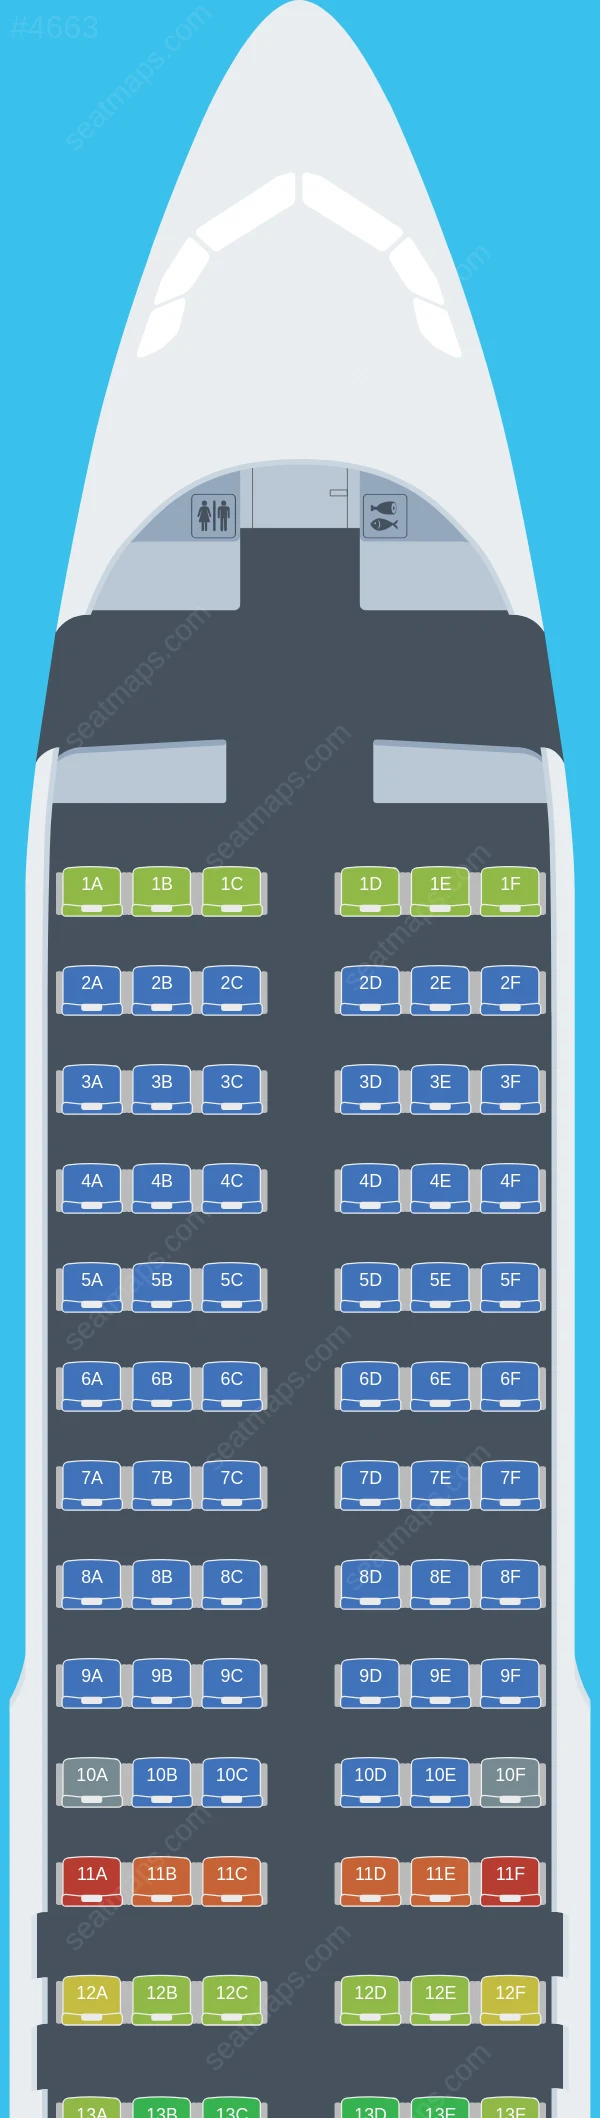 Iberojet Airbus A320-200 seatmap preview